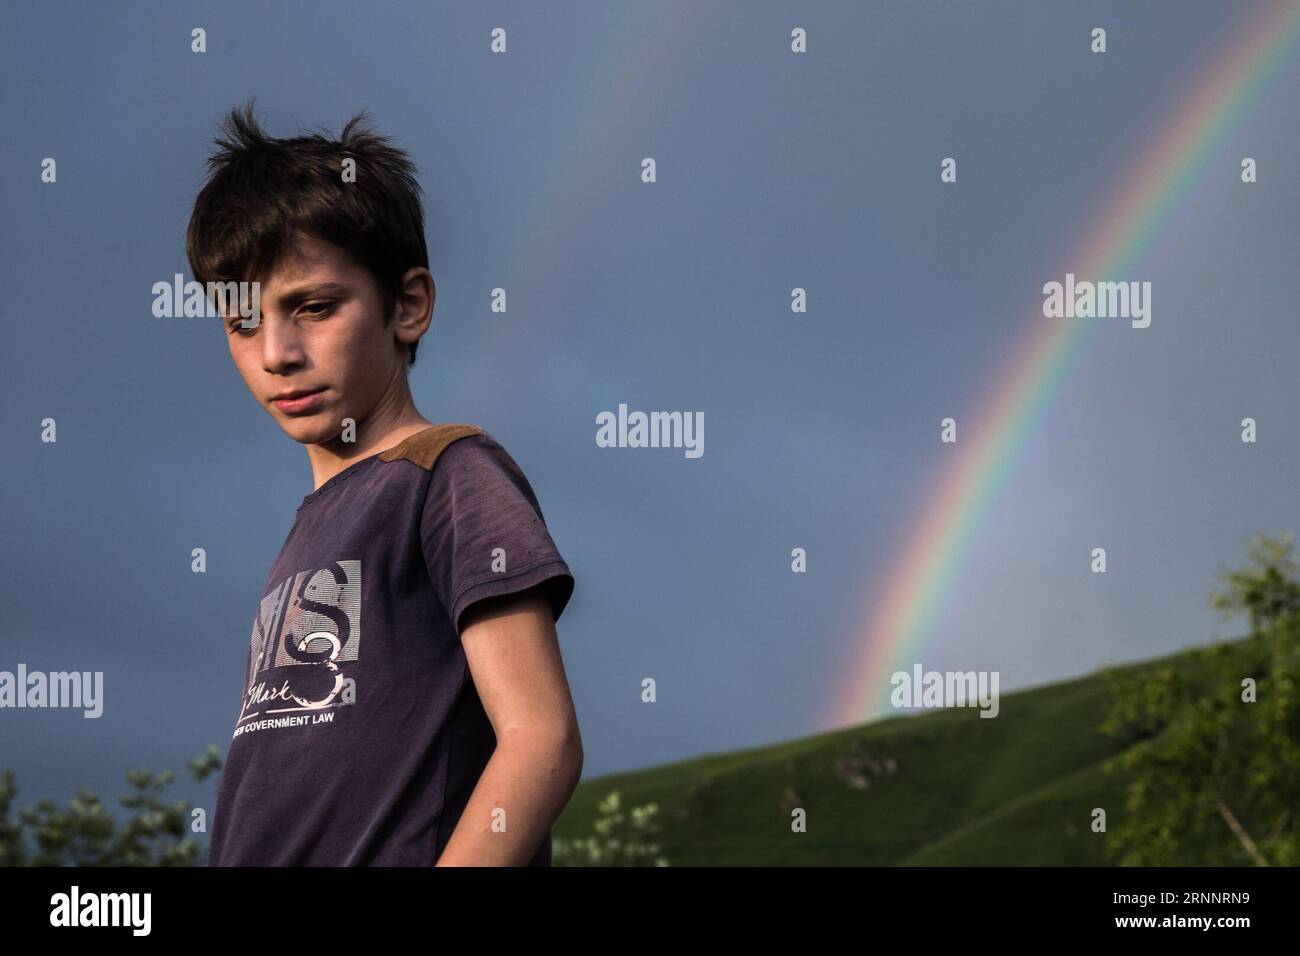 (170727) -- CHECHNYA, July 27, 2017 -- A boy walks in front of a rainbow in Vedensky District, Chechnya, Russia, on July 25, 2017. ) (zw) RUSSIA-CHECHNYA-DAILY LIFE BaixXueqi PUBLICATIONxNOTxINxCHN   Chechnya July 27 2017 a Boy Walks in Front of a Rainbow in  District Chechnya Russia ON July 25 2017 ZW Russia Chechnya Daily Life BaixXueqi PUBLICATIONxNOTxINxCHN Stock Photo